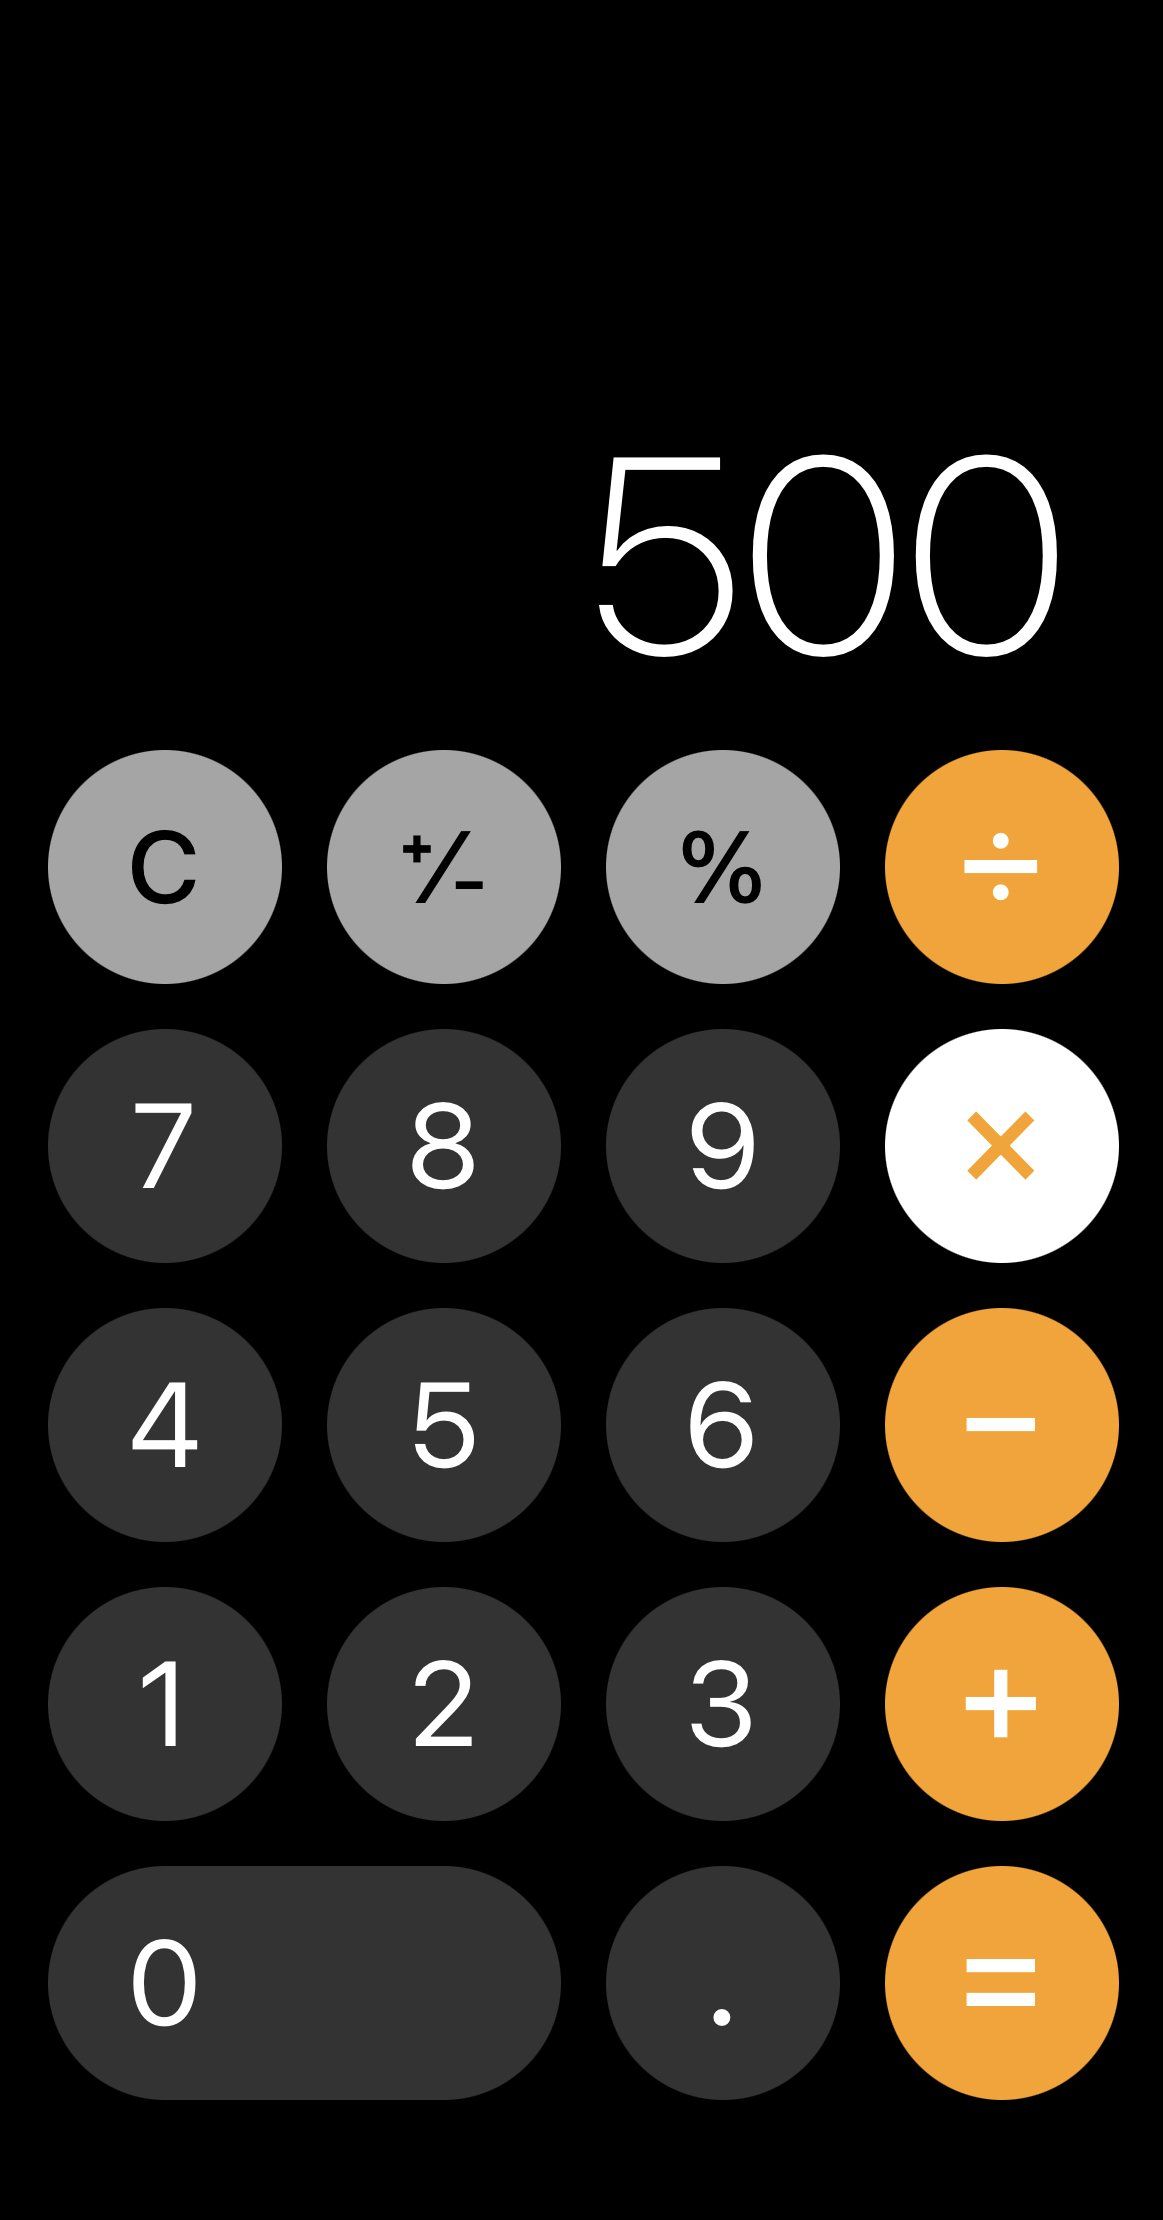 $500 on iPhone calculator for moving expenses.